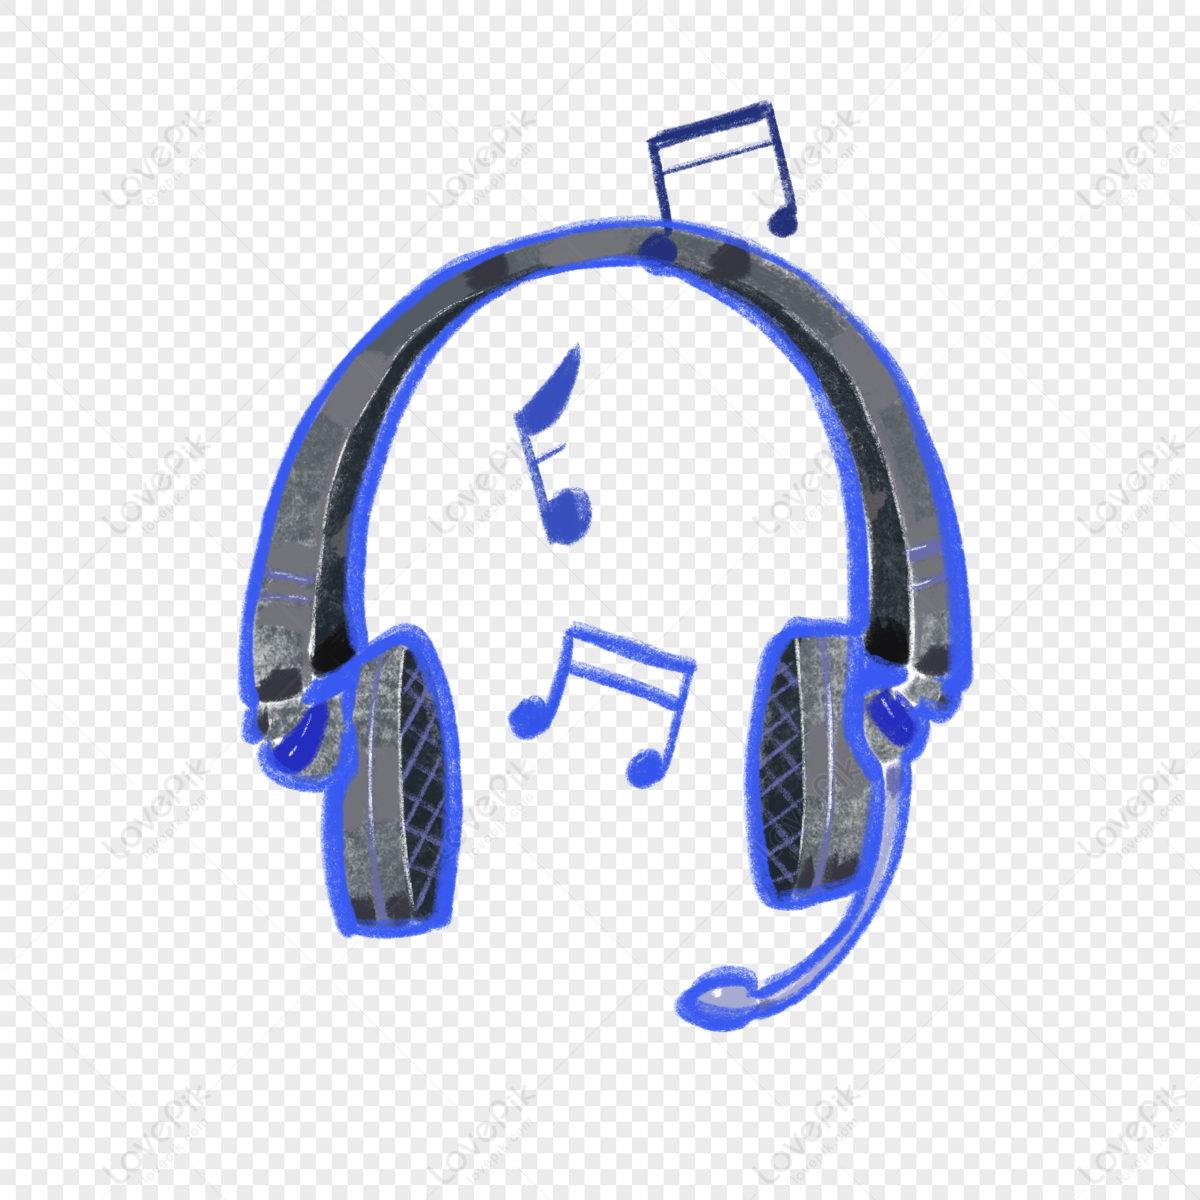 Cool Headphones PNG Transparent Background And Clipart Image For Free  Download - Lovepik | 401262060